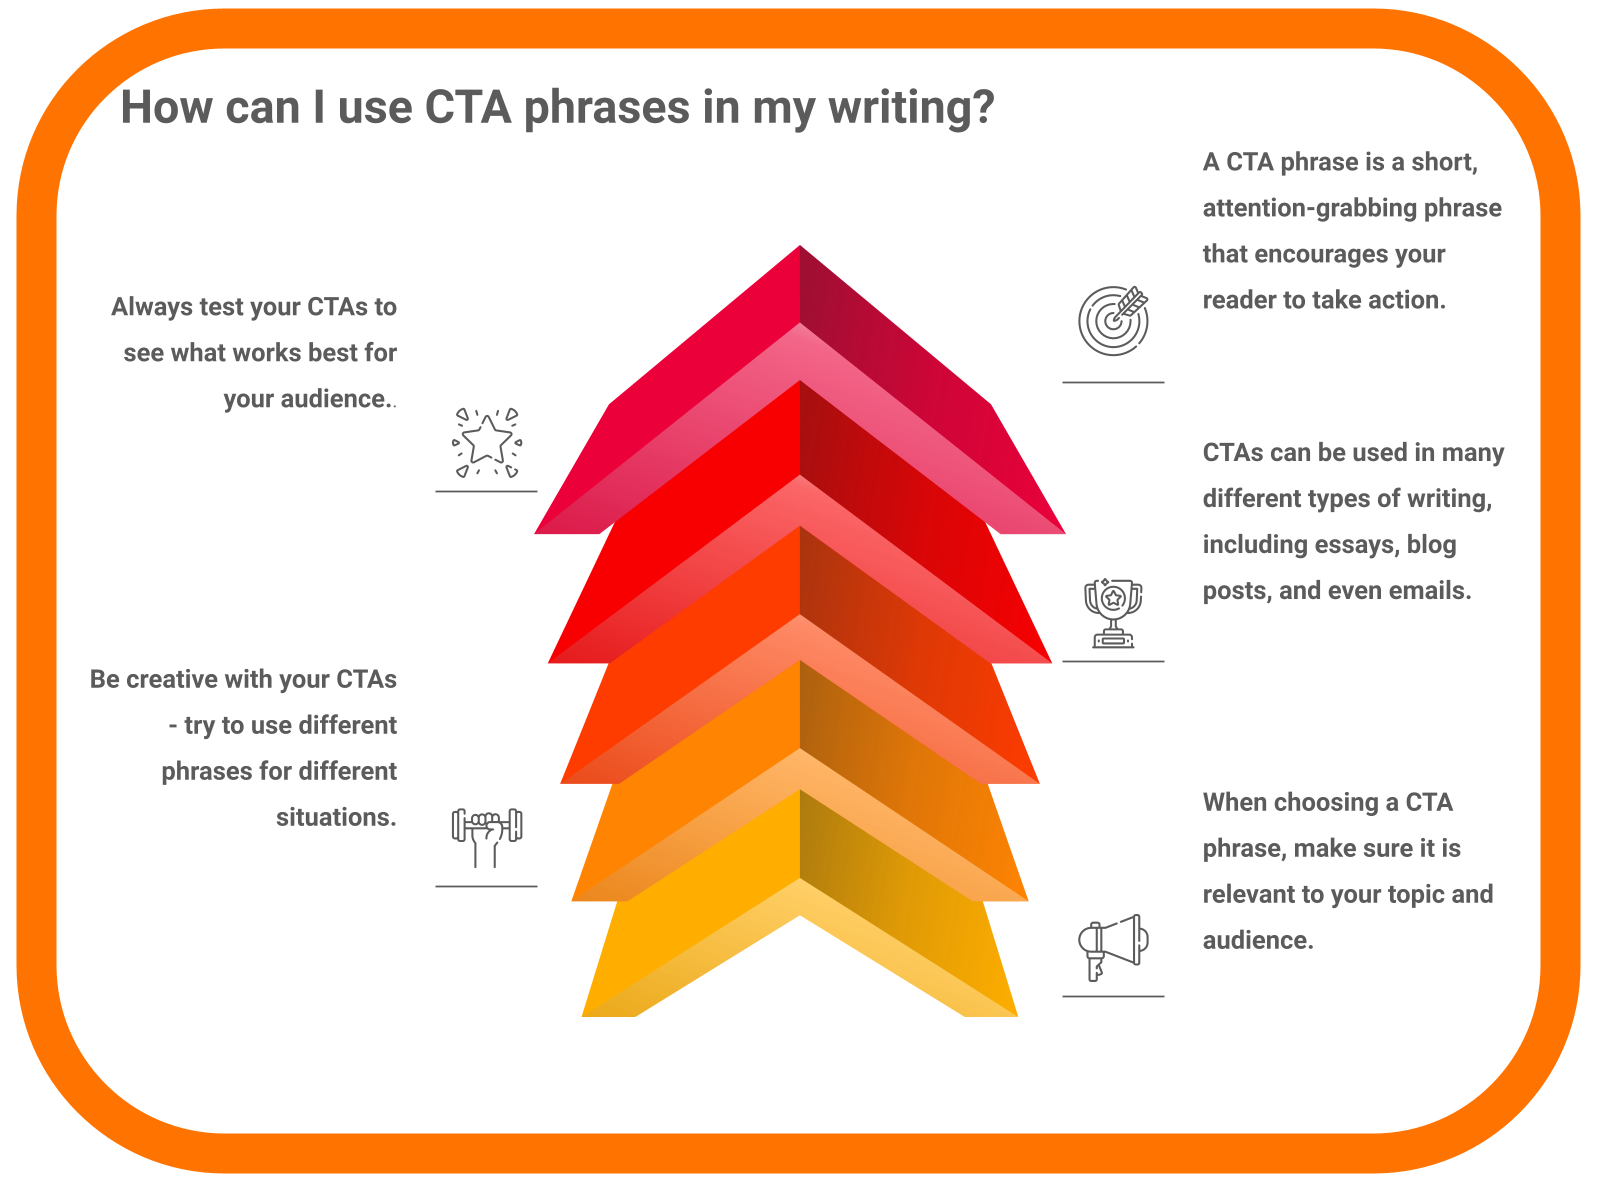 How can I use CTA phrases in my writing?